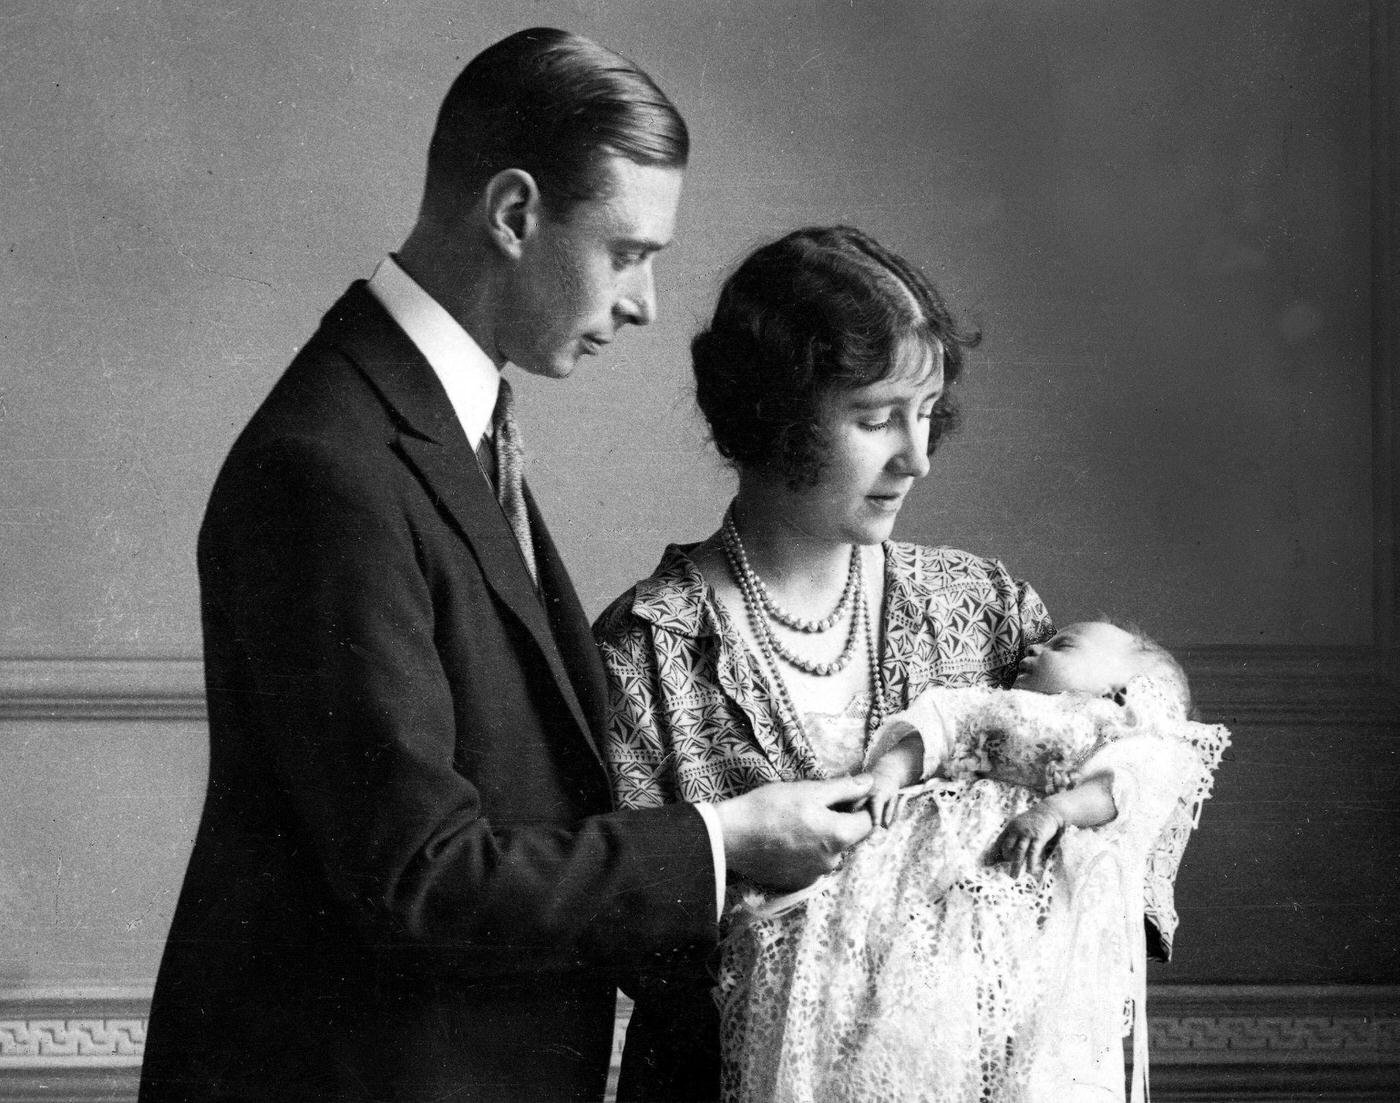 The Duke and Duchess of York with their daughter (later, Queen Elizabeth II) as she sleeps in a precious christening robe, which has been used in the Royal Family for generations, 1926.